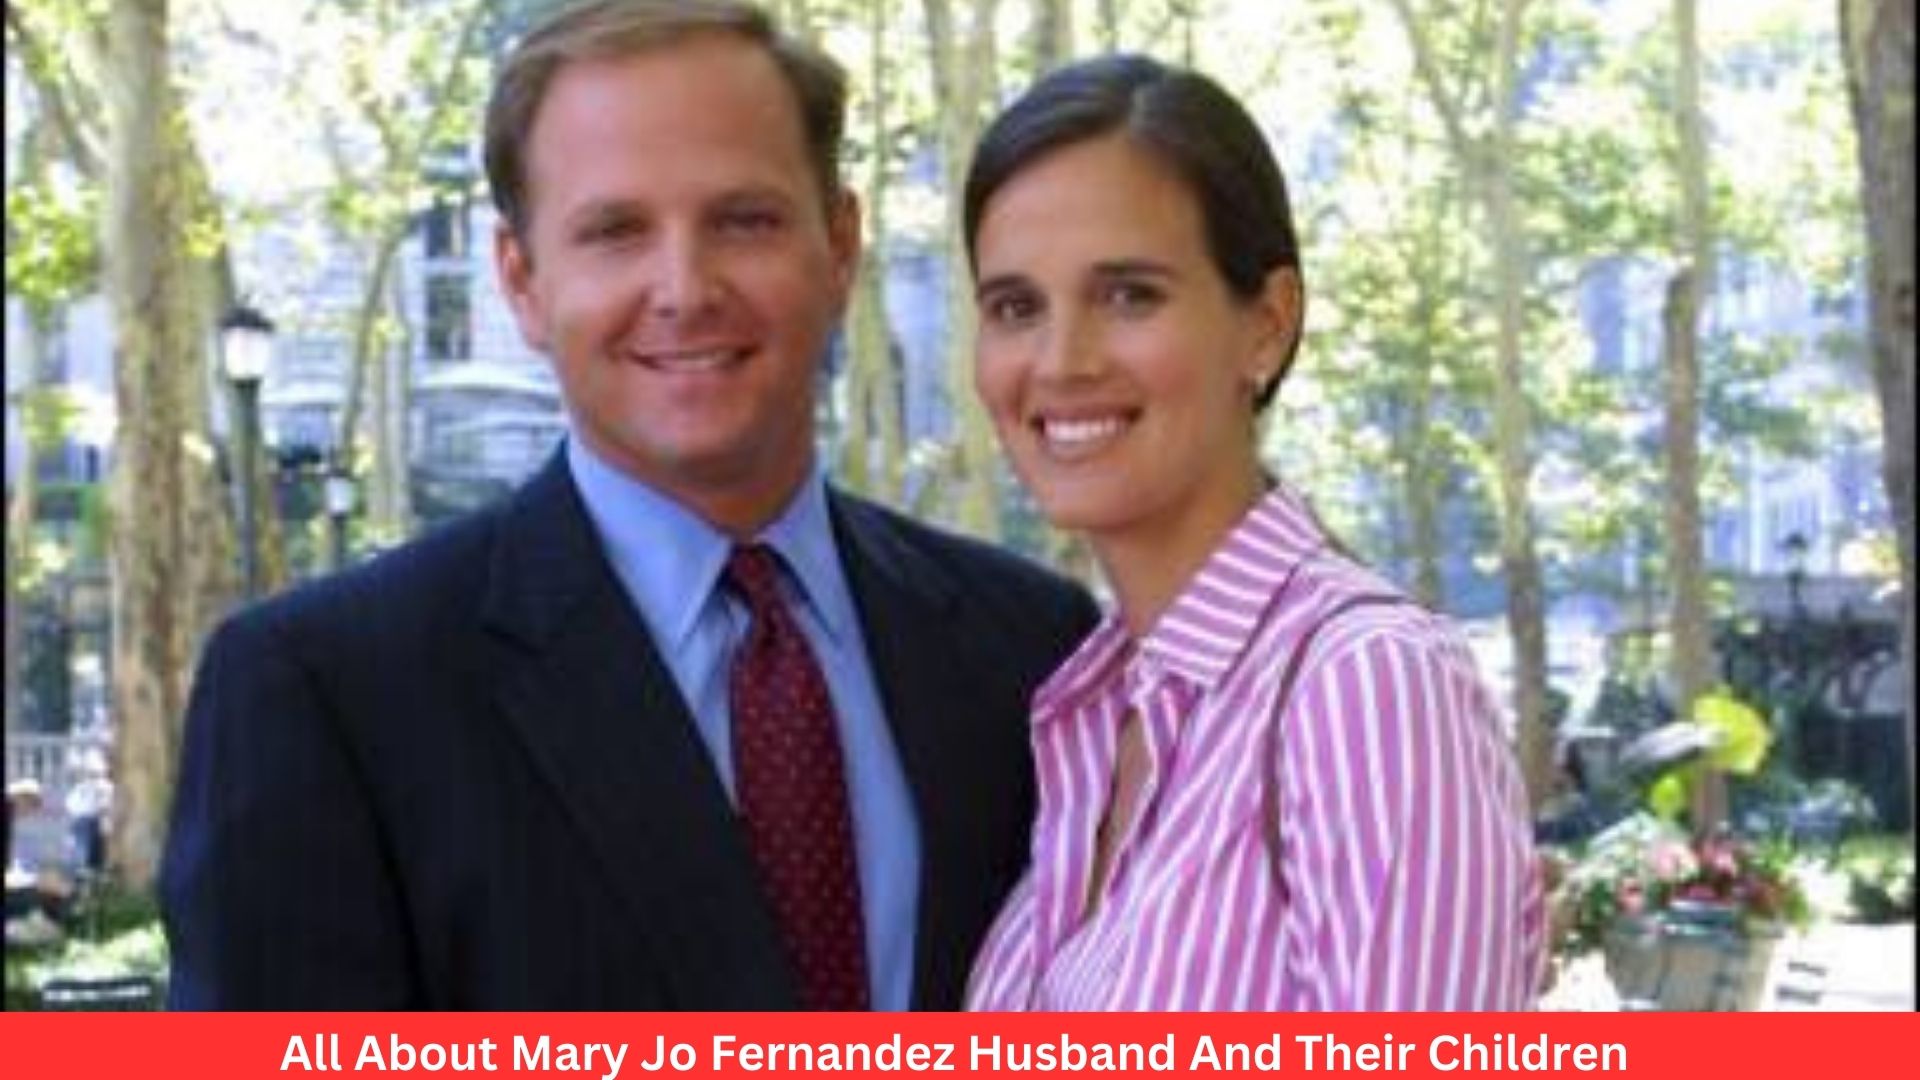 All About Mary Jo Fernandez Husband And Their Children